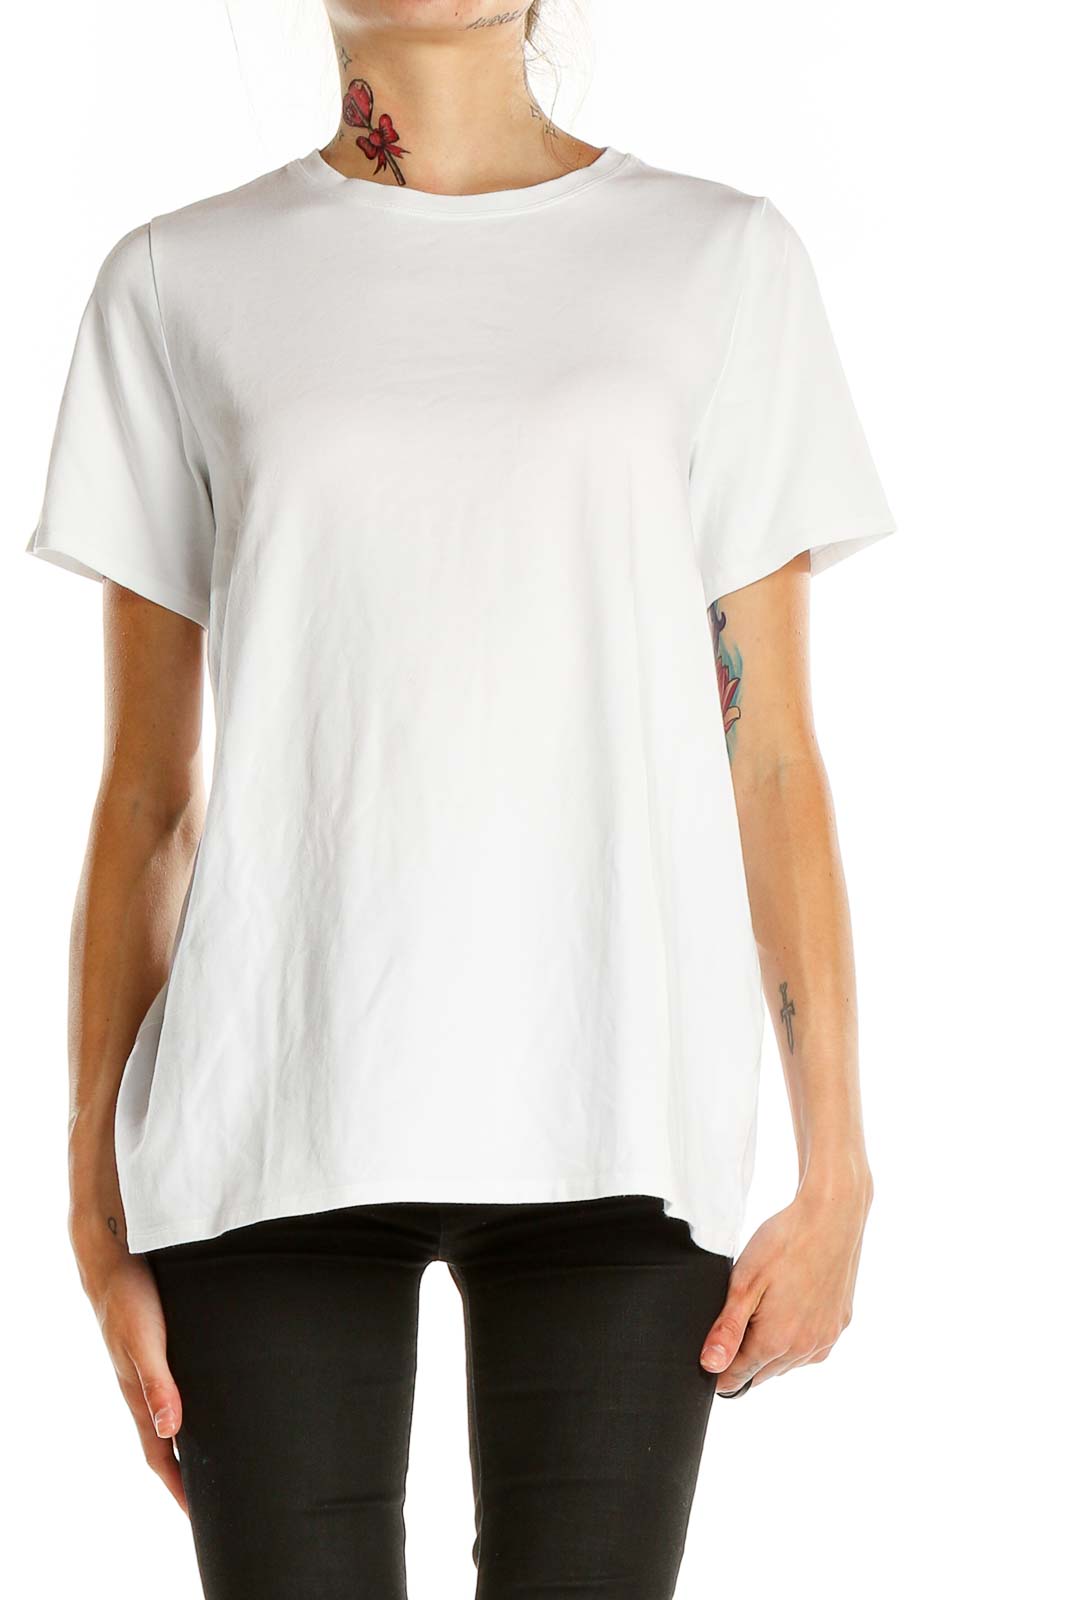 White Casual Shirt Front